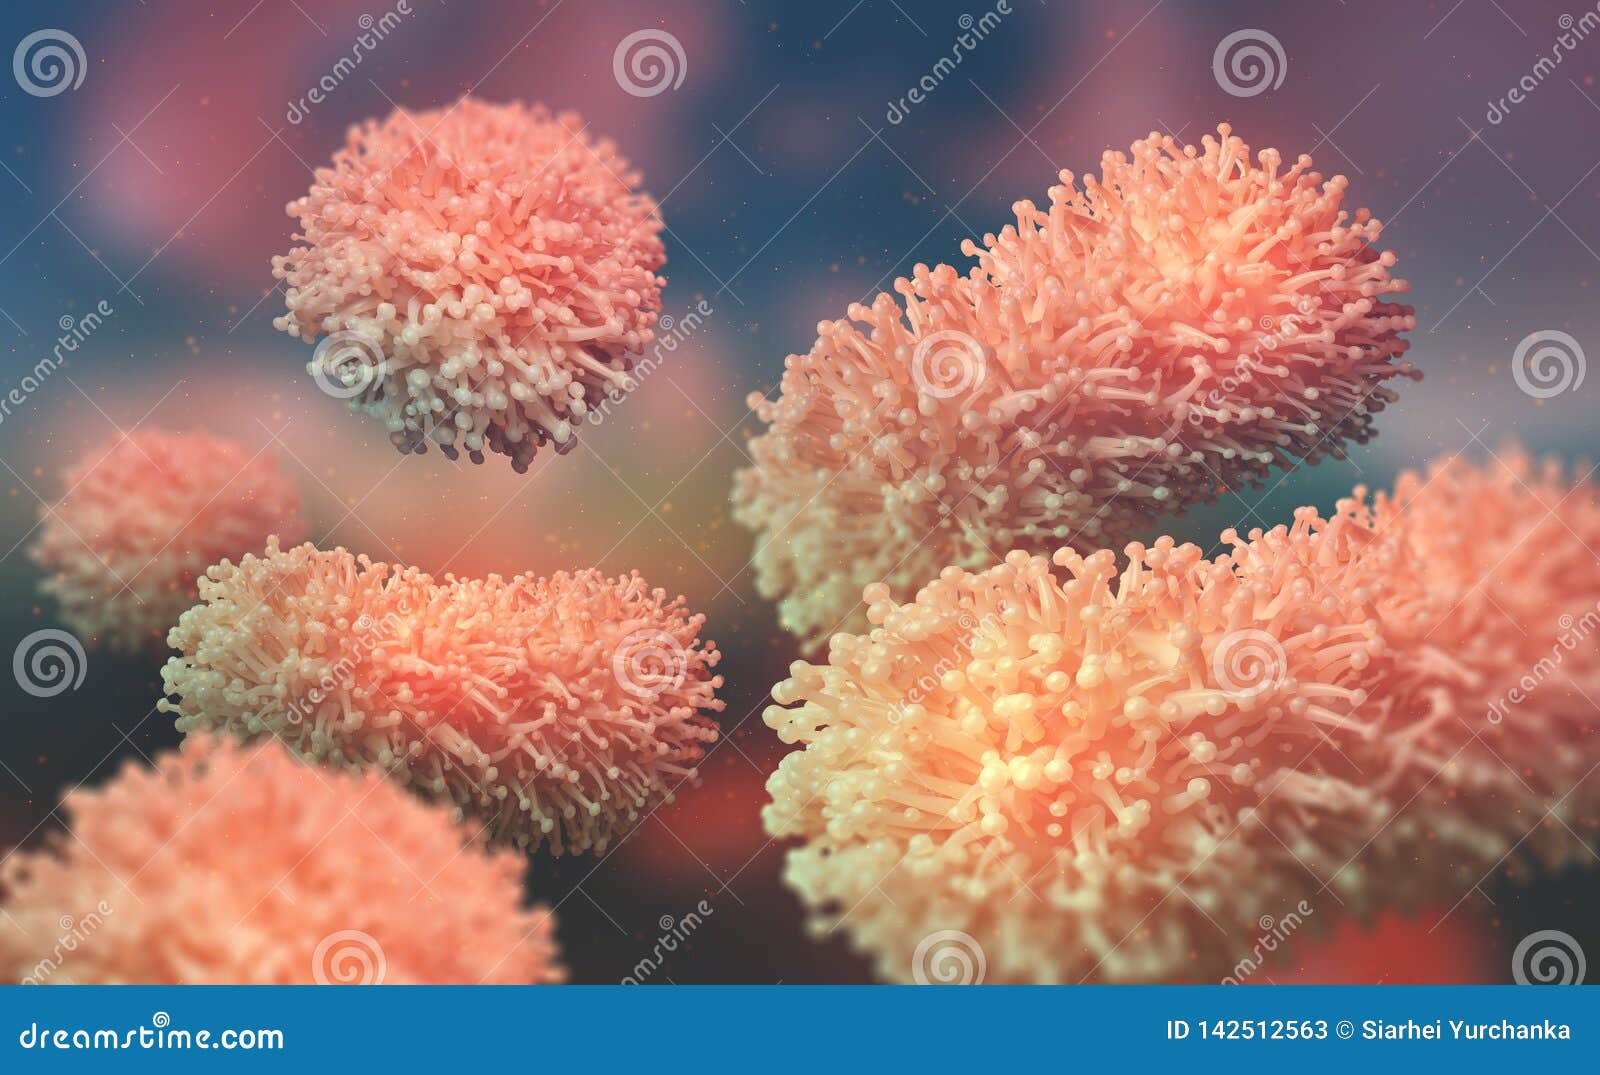 germs microorganism cells under microscope. viruses, bacteria and microbes. abstract backdrop